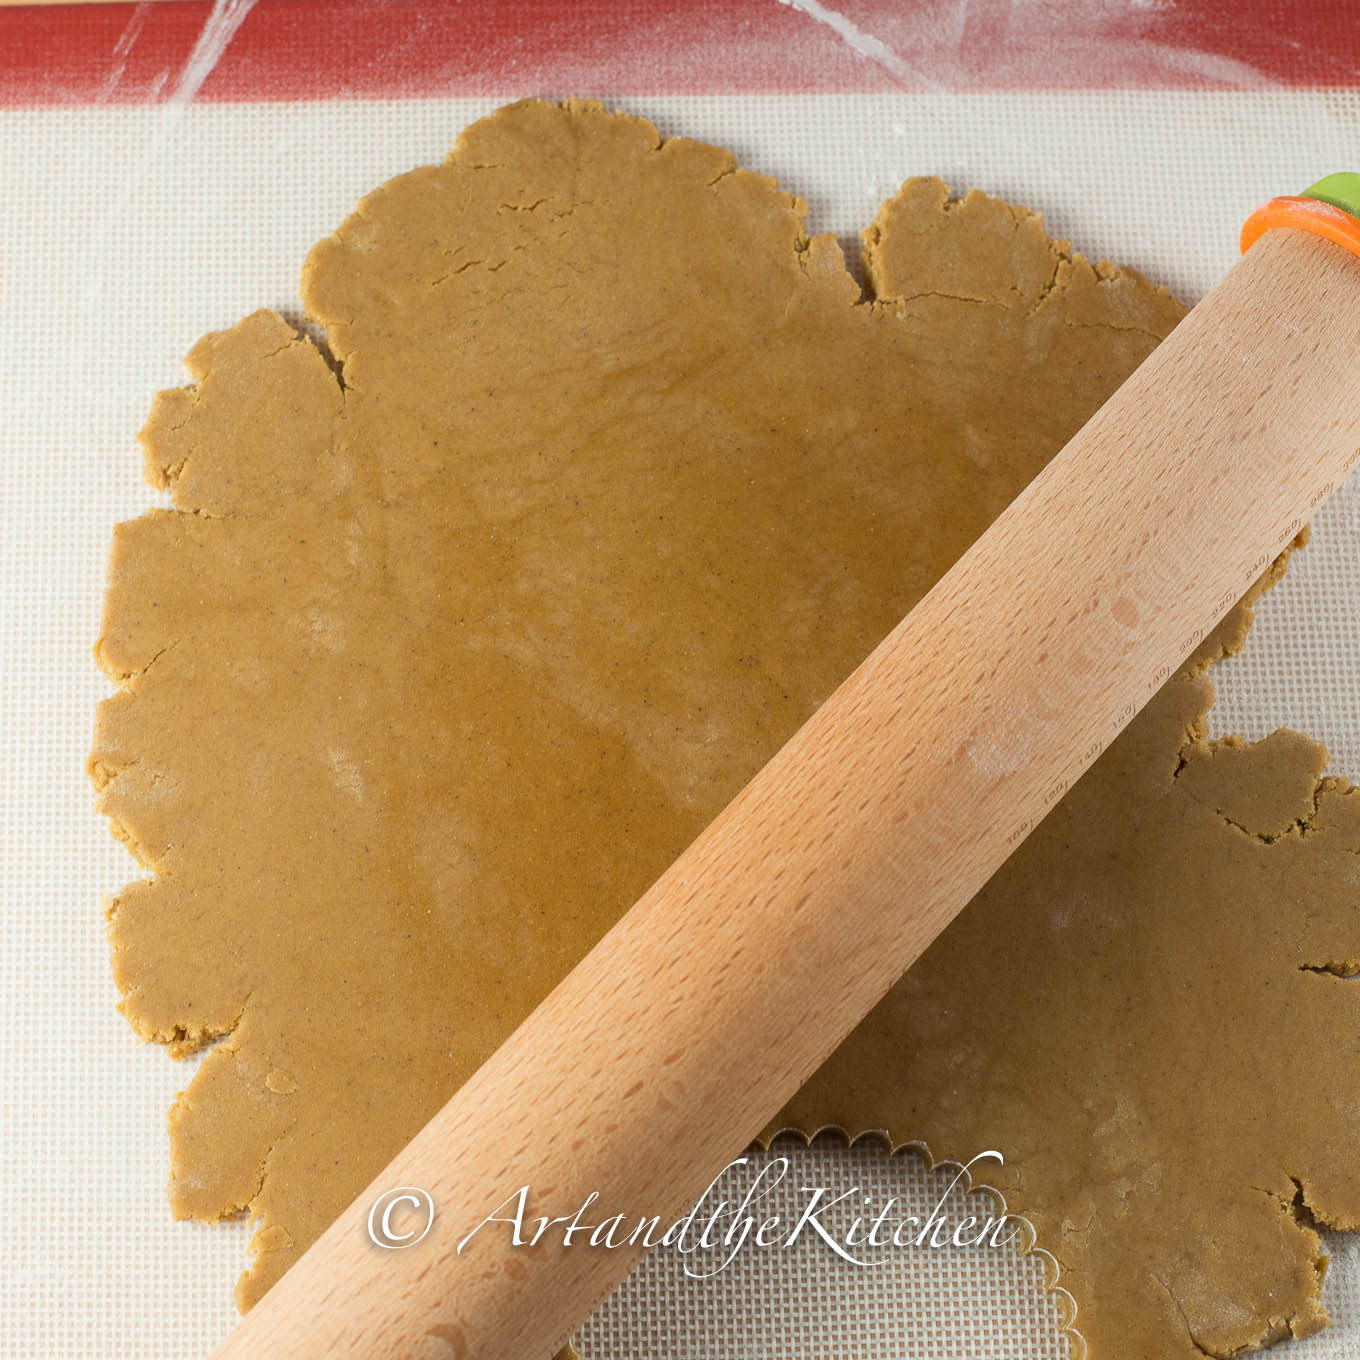 Wood rolling pin rolling out gingerbread dough.